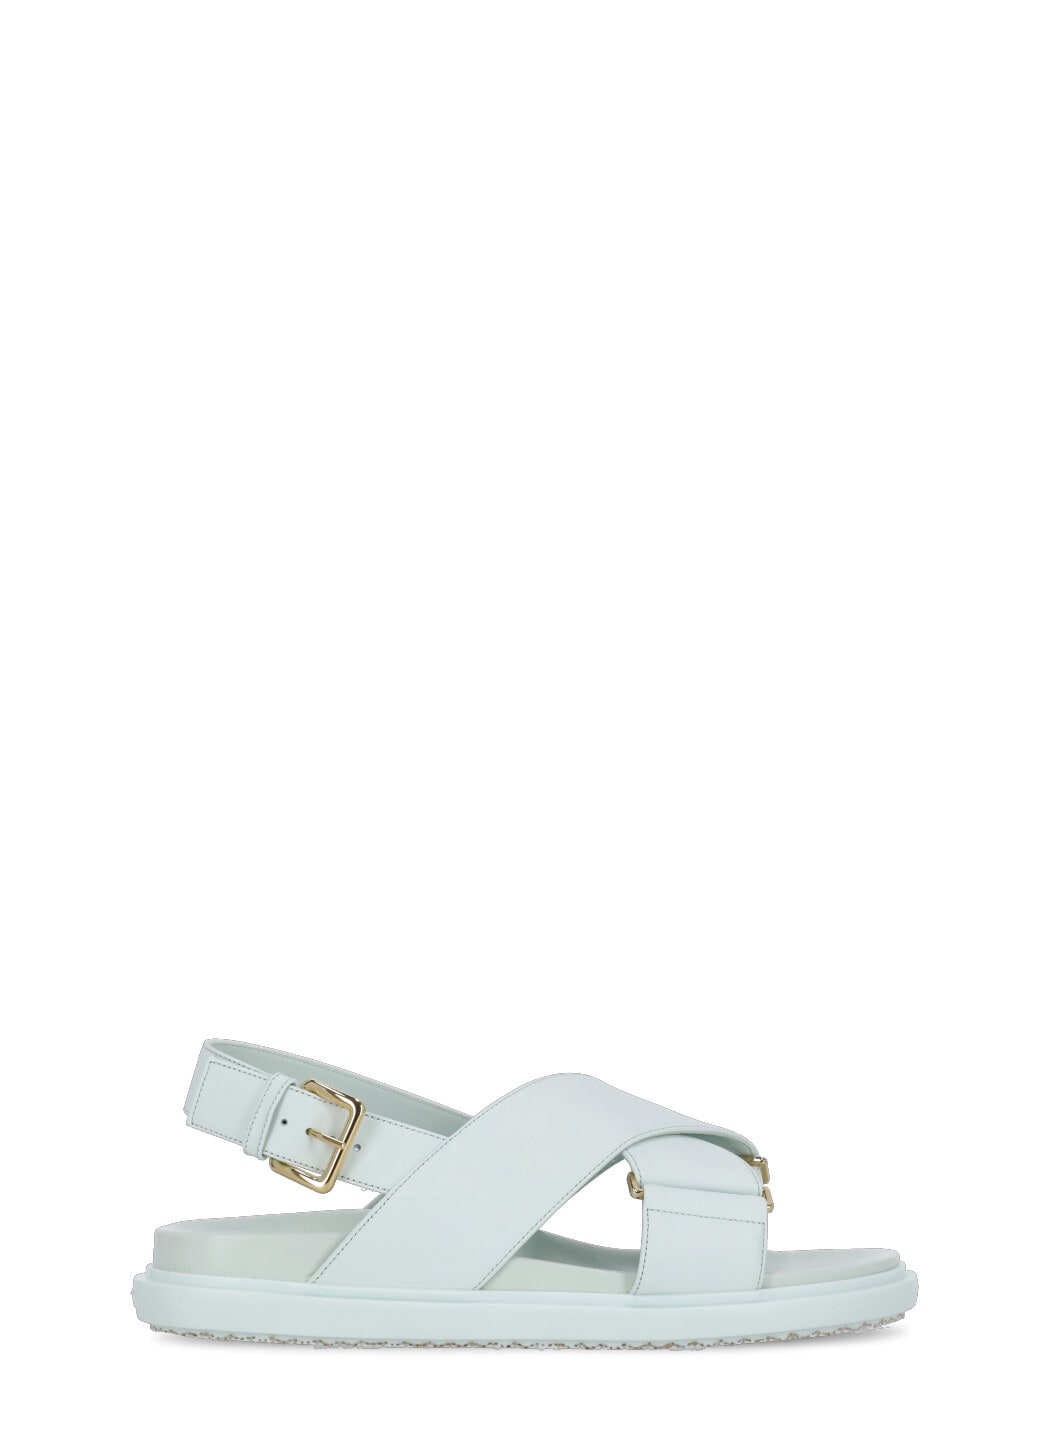 Marni Leather Sandals In Light Blue